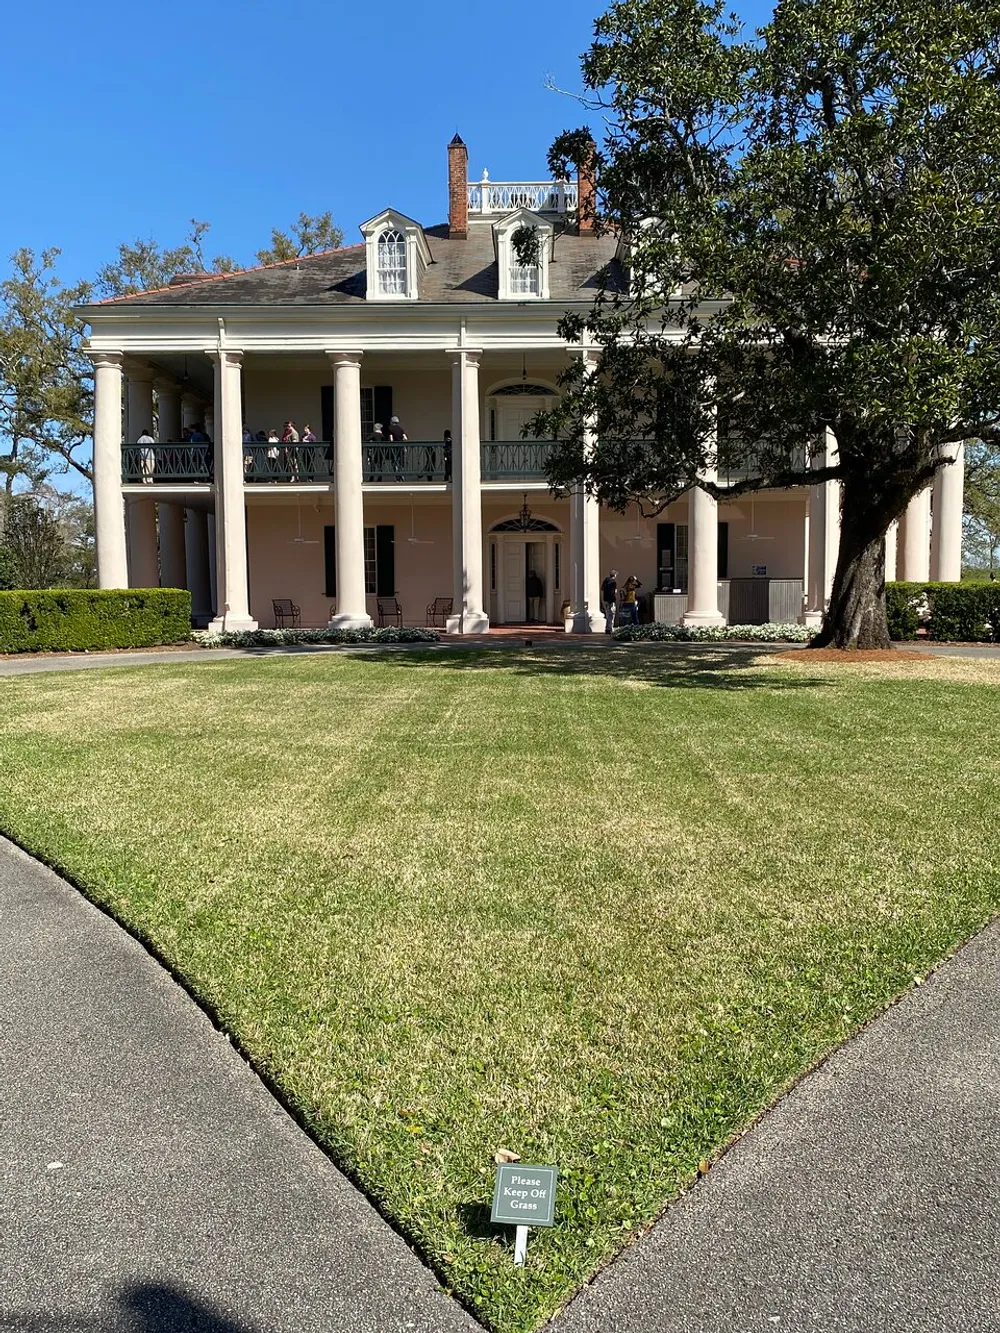 The image displays a grand two-story house with a large porch and columns surrounded by a well-manicured lawn with a sign reading Please Keep Off Grass and a few visitors visible on the upper balcony